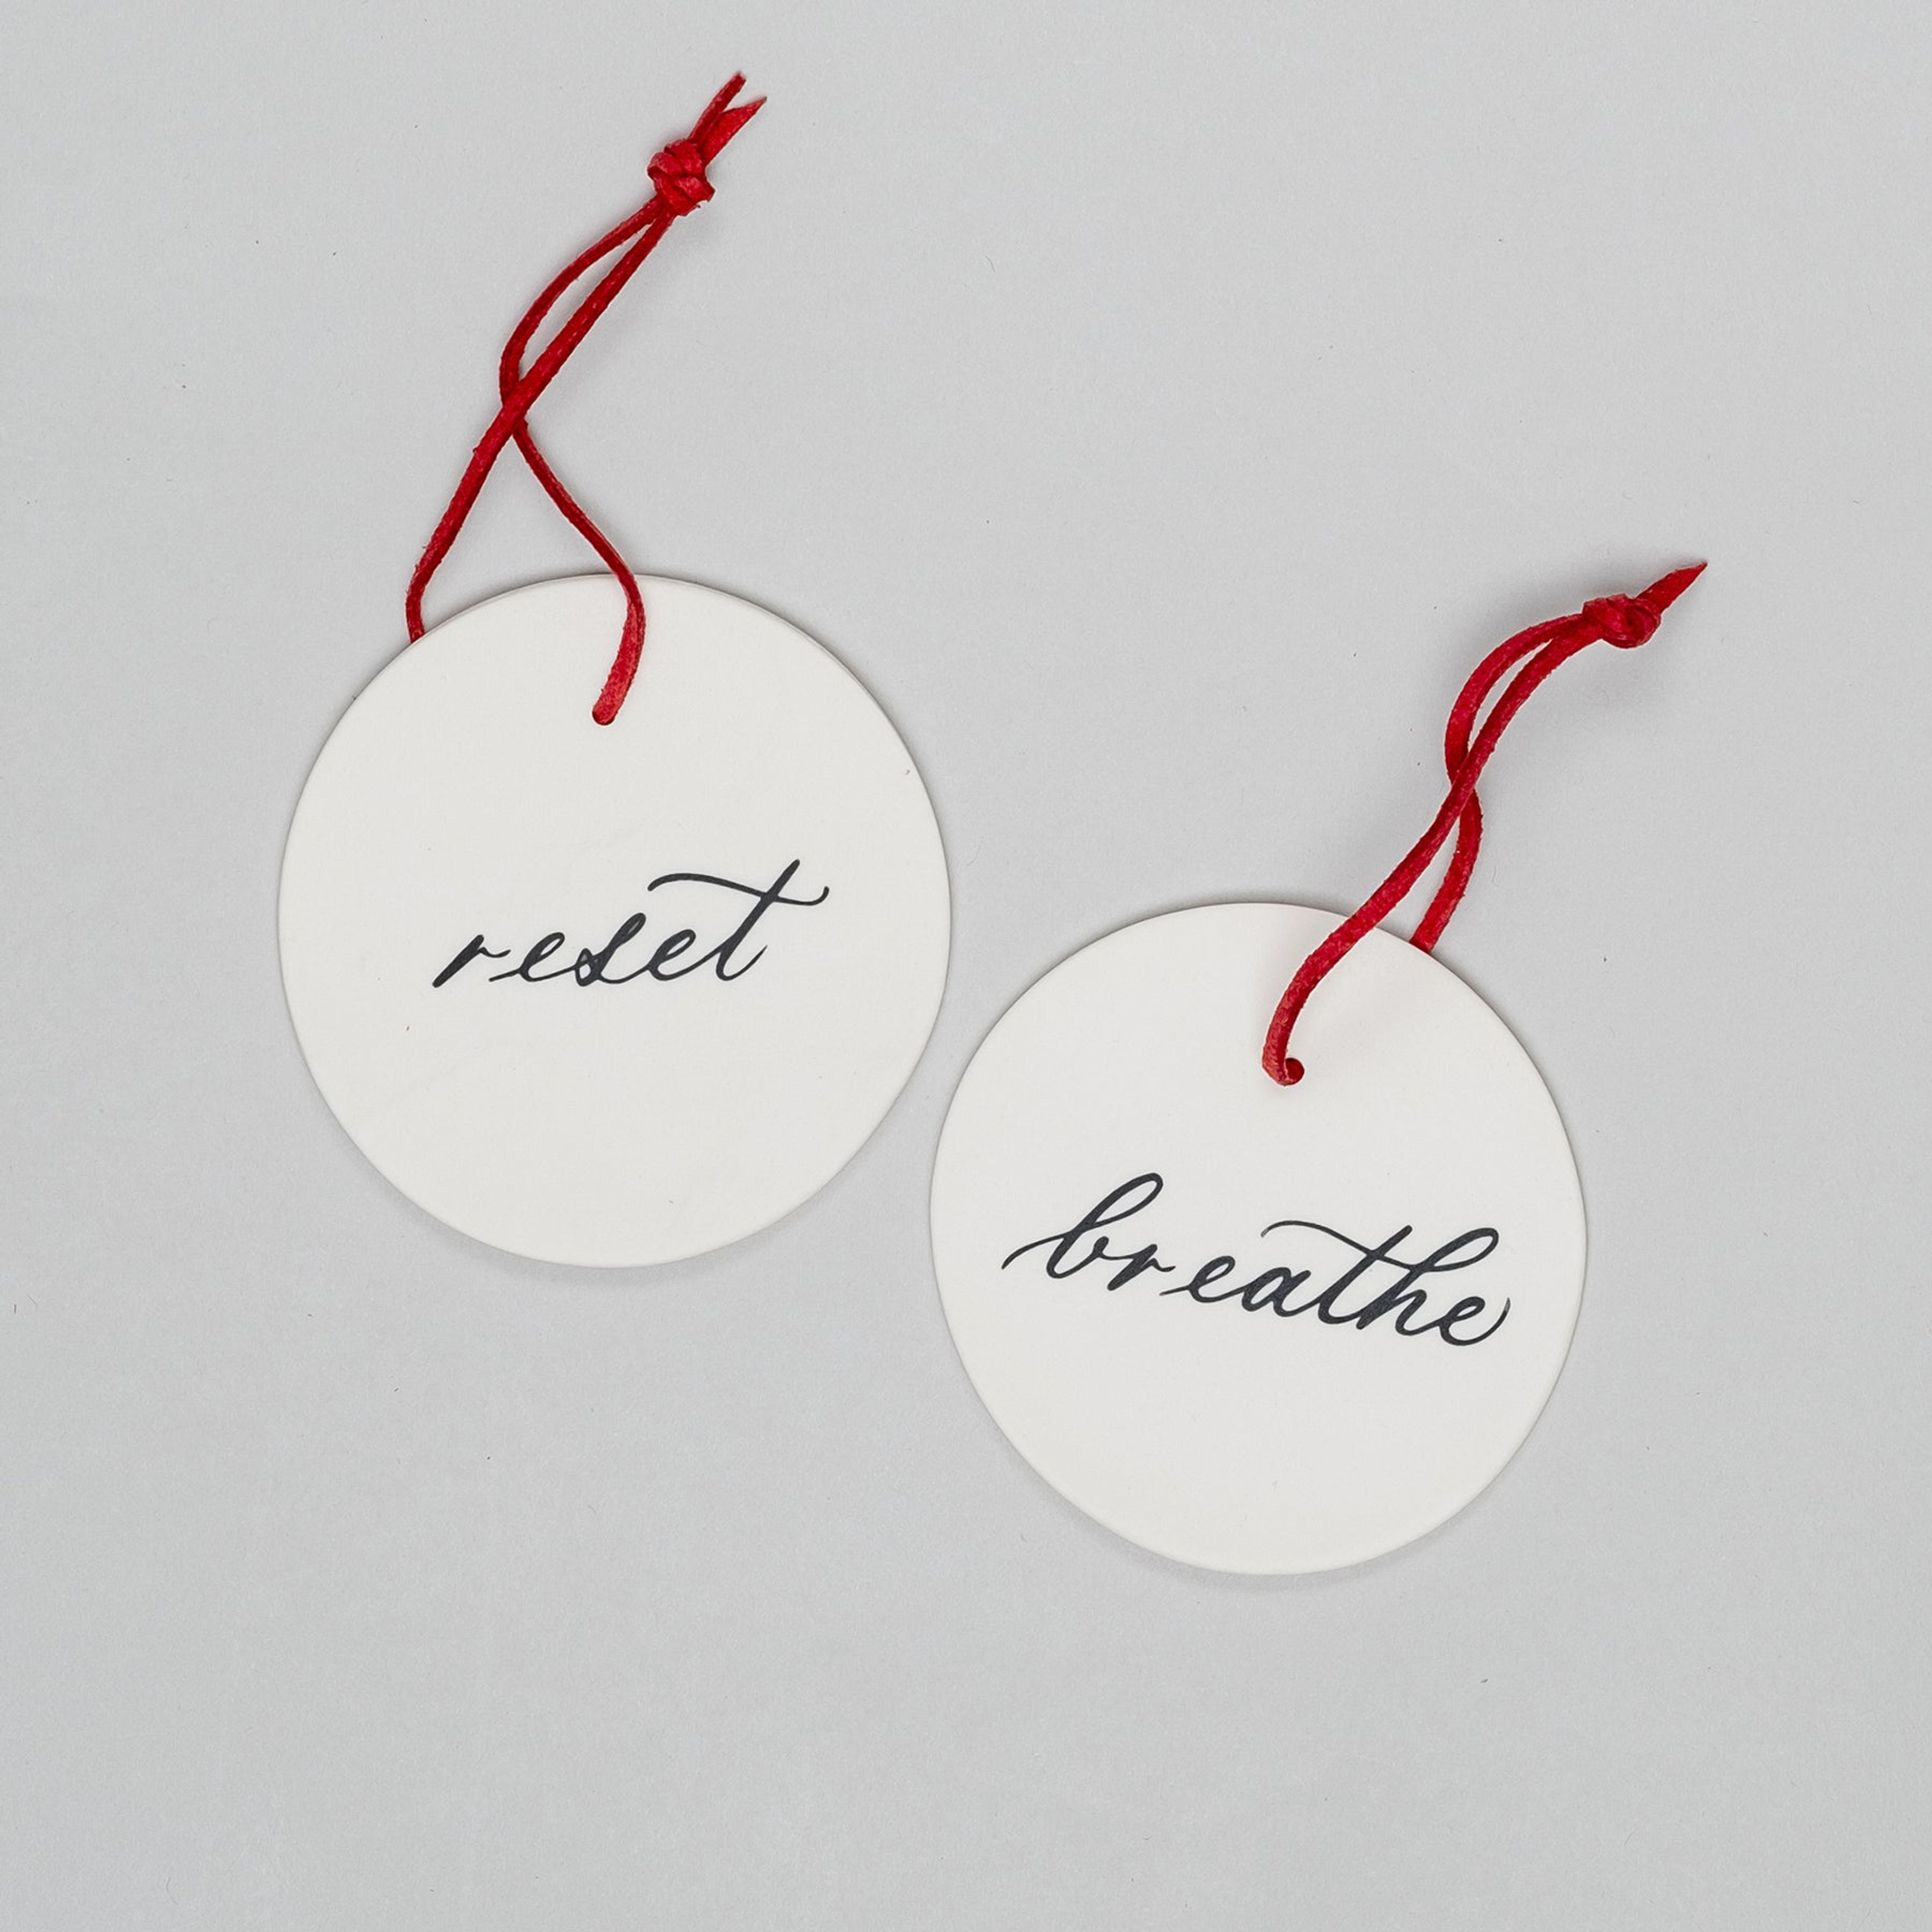 Reset & Breathe Ornament Set of Two